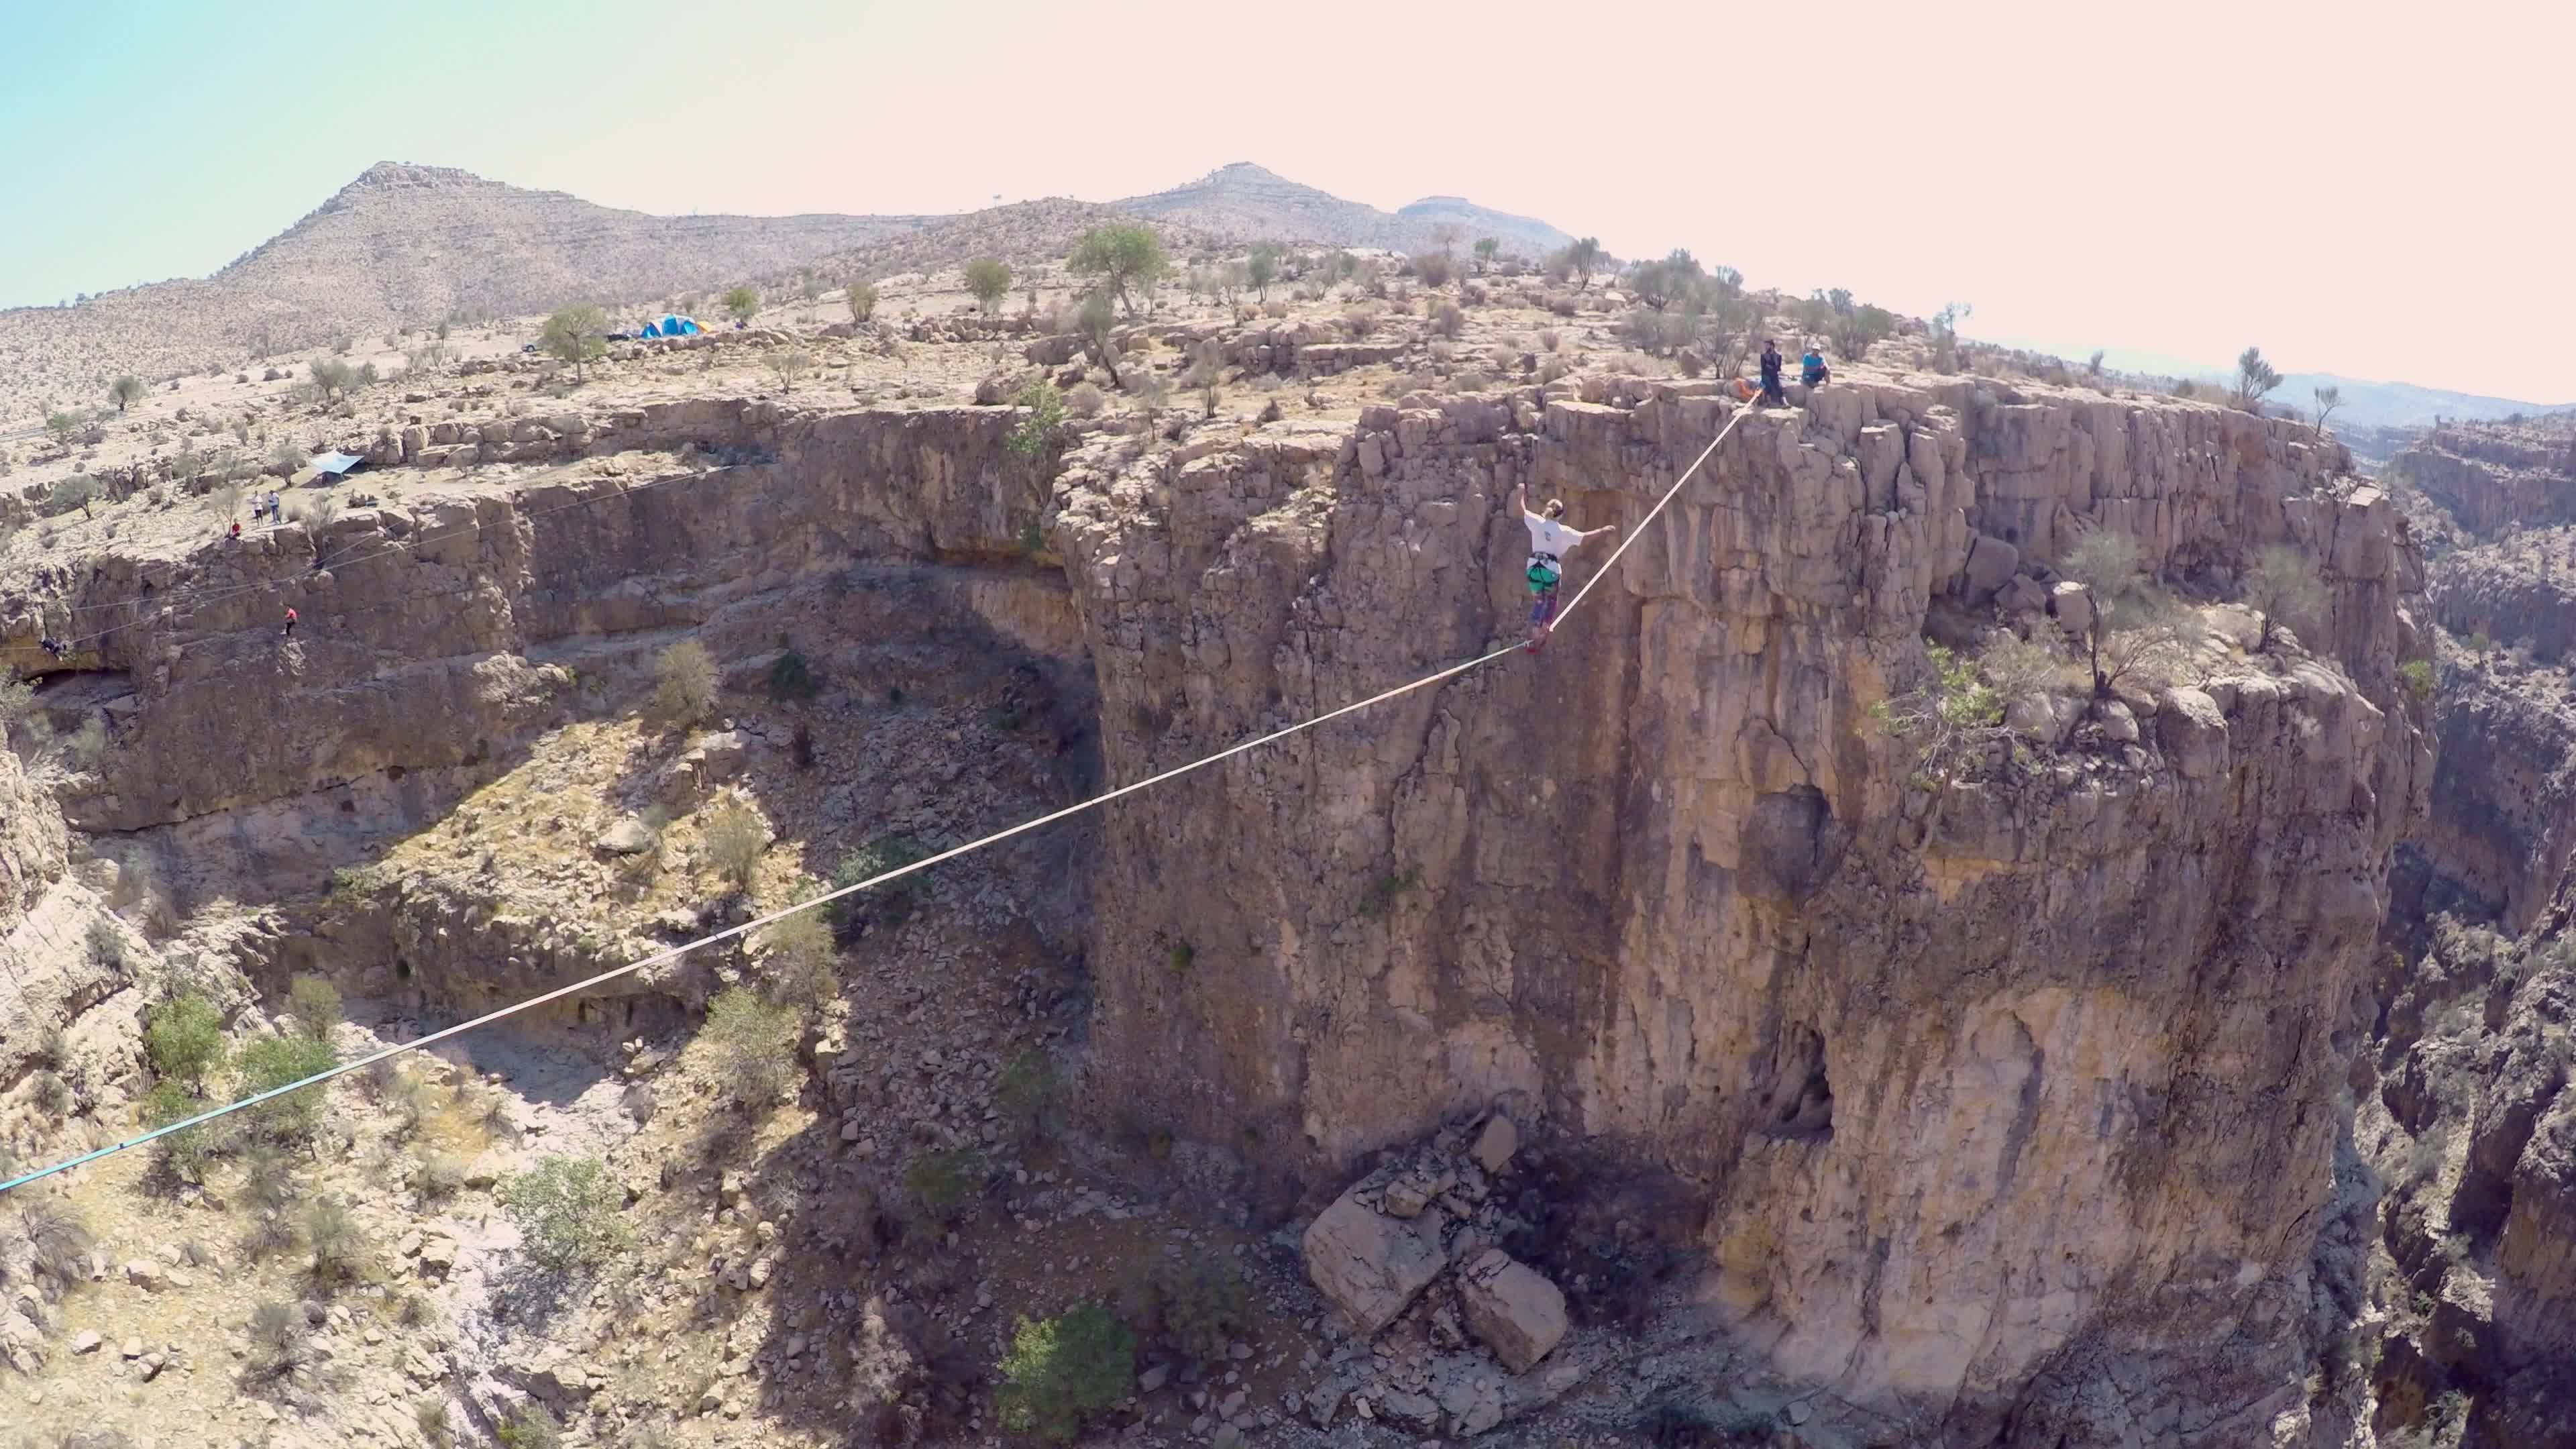 Slacklining: Extreme sports, Walking on a line through the Canyon. 3840x2160 4K Wallpaper.